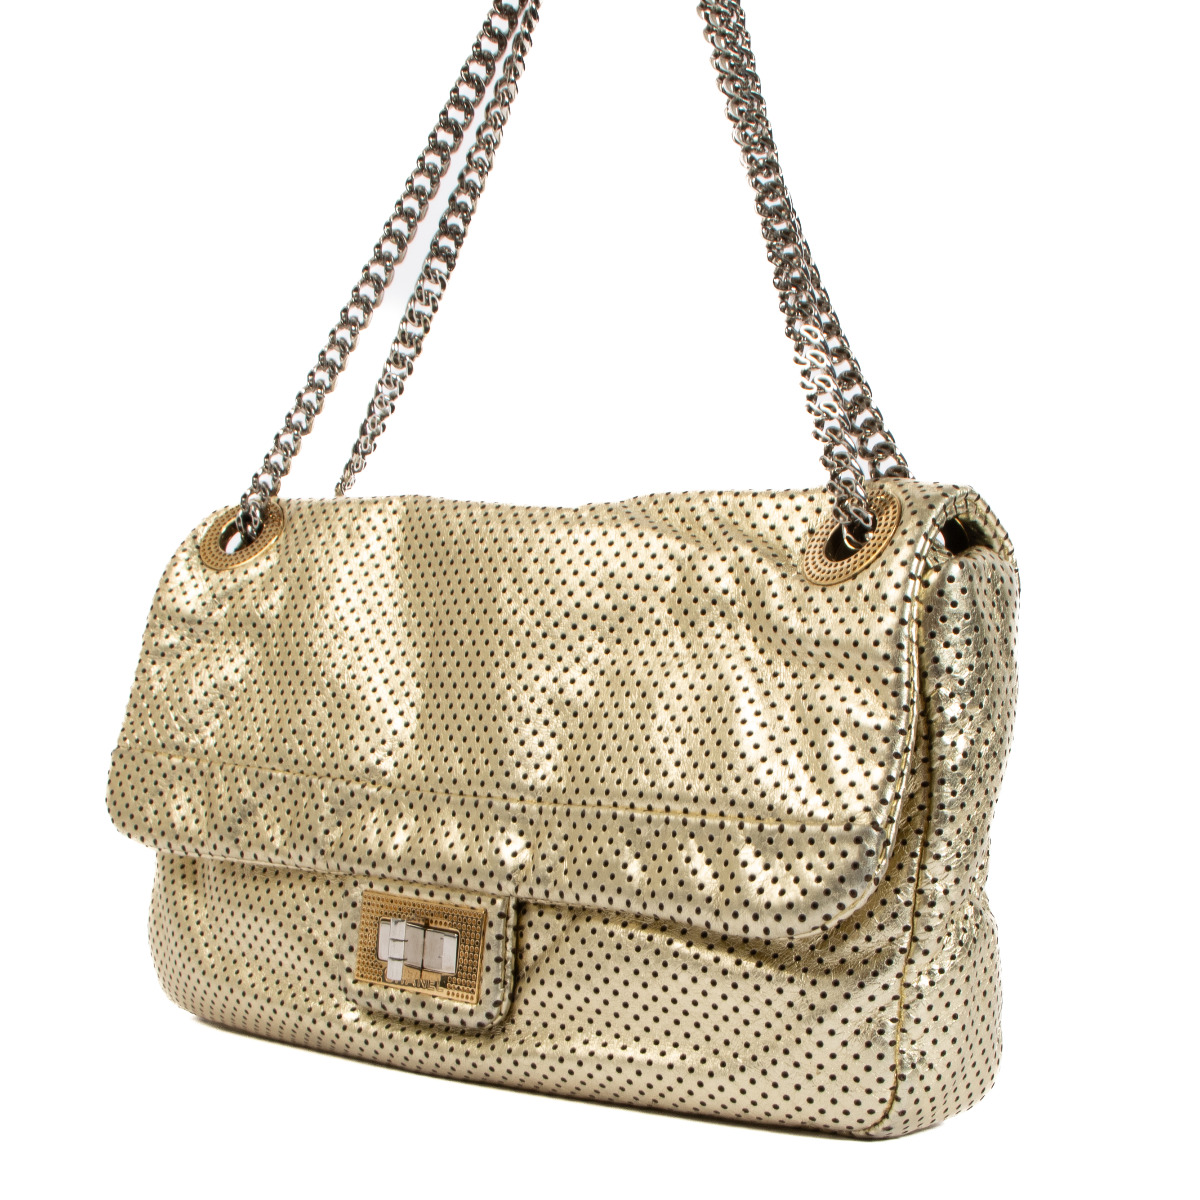 Chanel 2.55 Gold Perforated Drill Metallic Flap Bag ○ Labellov